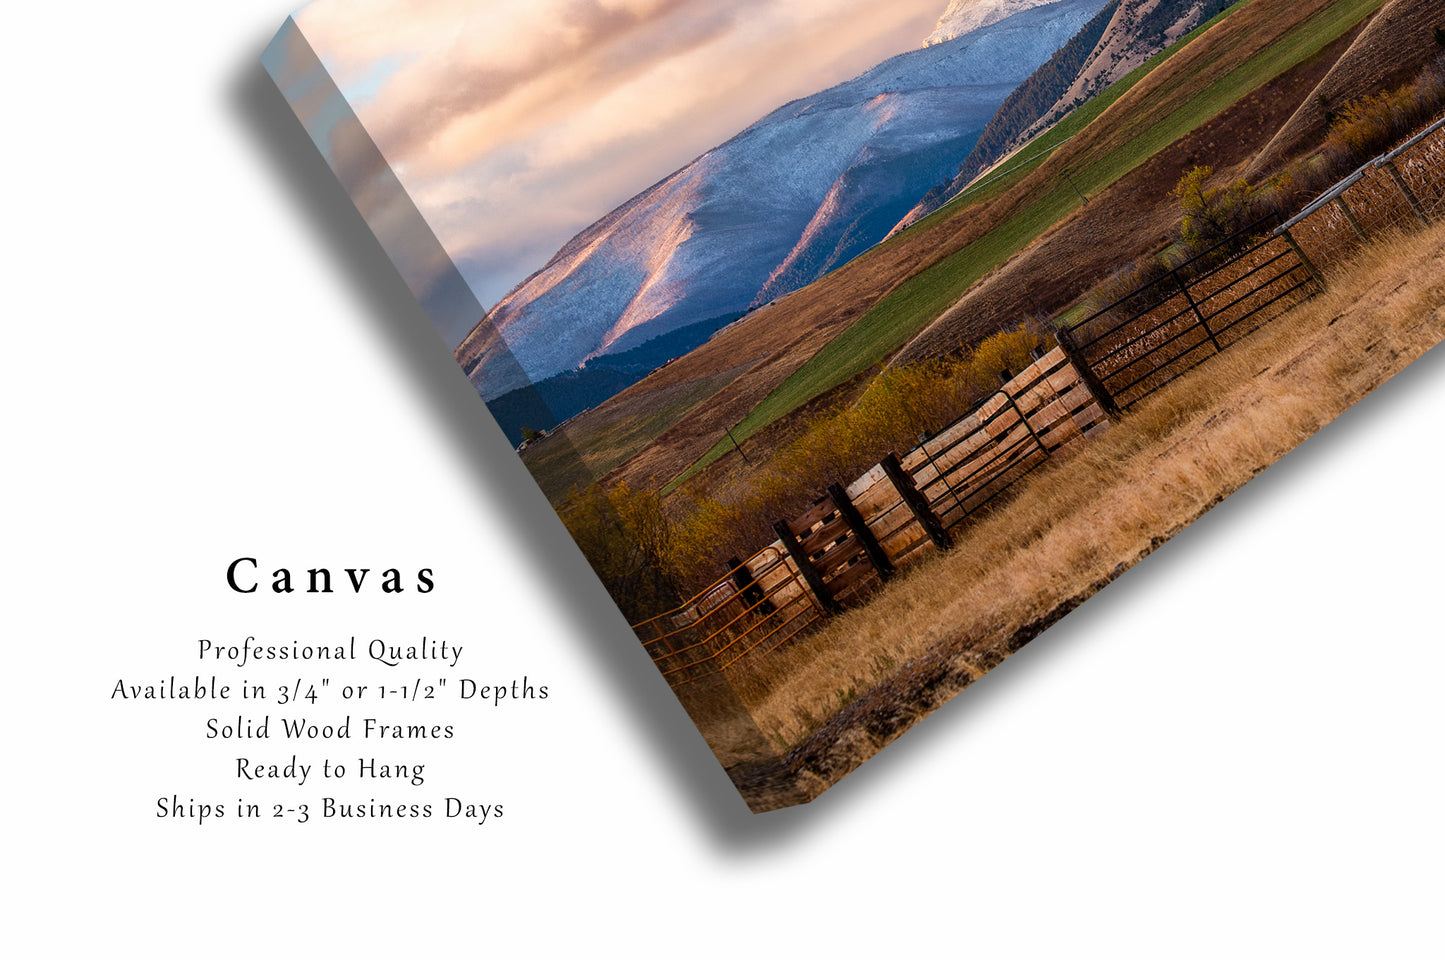 Western Canvas Wall Art - Gallery Wrap of Snowy Peak and Mountain Landscape Overlooking Valley on Autumn Day in Montana Rocky Mountain Decor